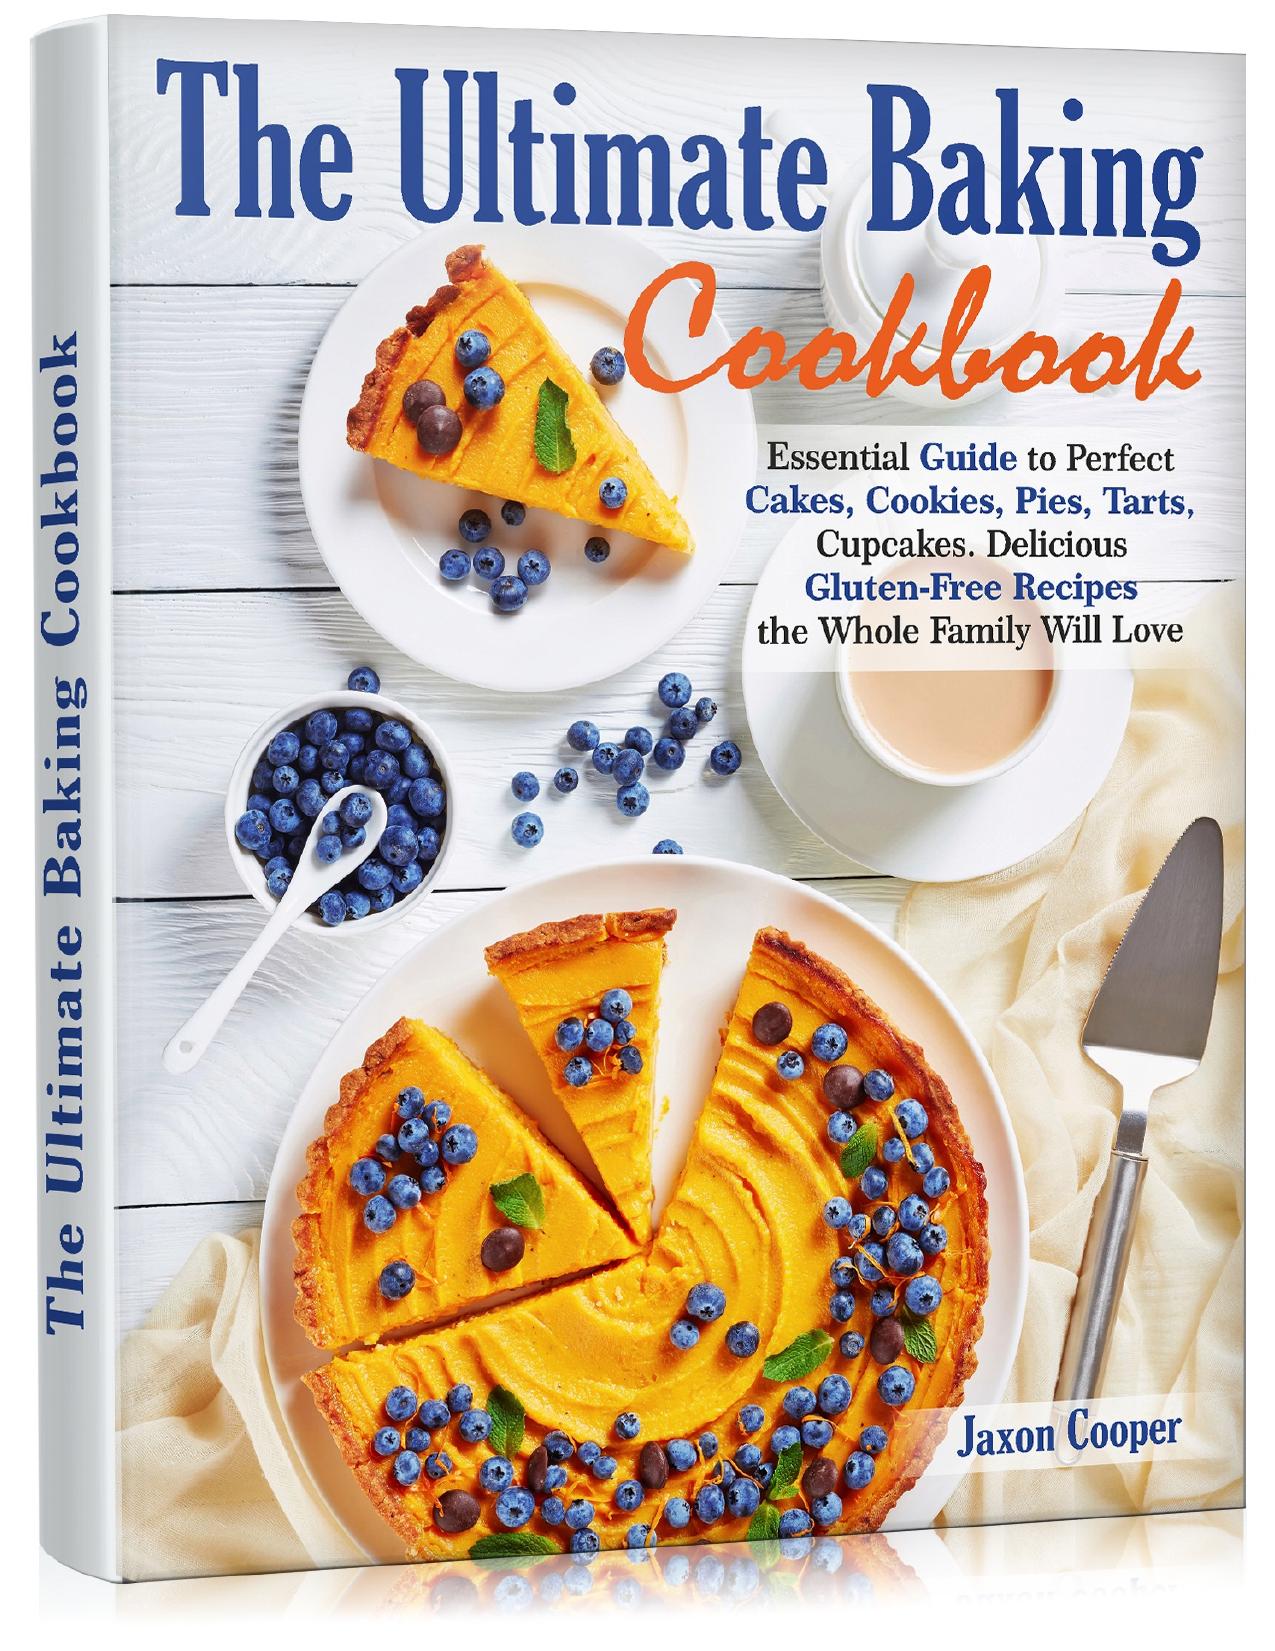 The Ultimate Baking Cookbook: Essential Guide to Perfect Cakes, Cookies, Pies, Tarts, Cupcakes. Delicious Gluten-Free Recipes the Whole Family Will Love by Cooper Jaxon